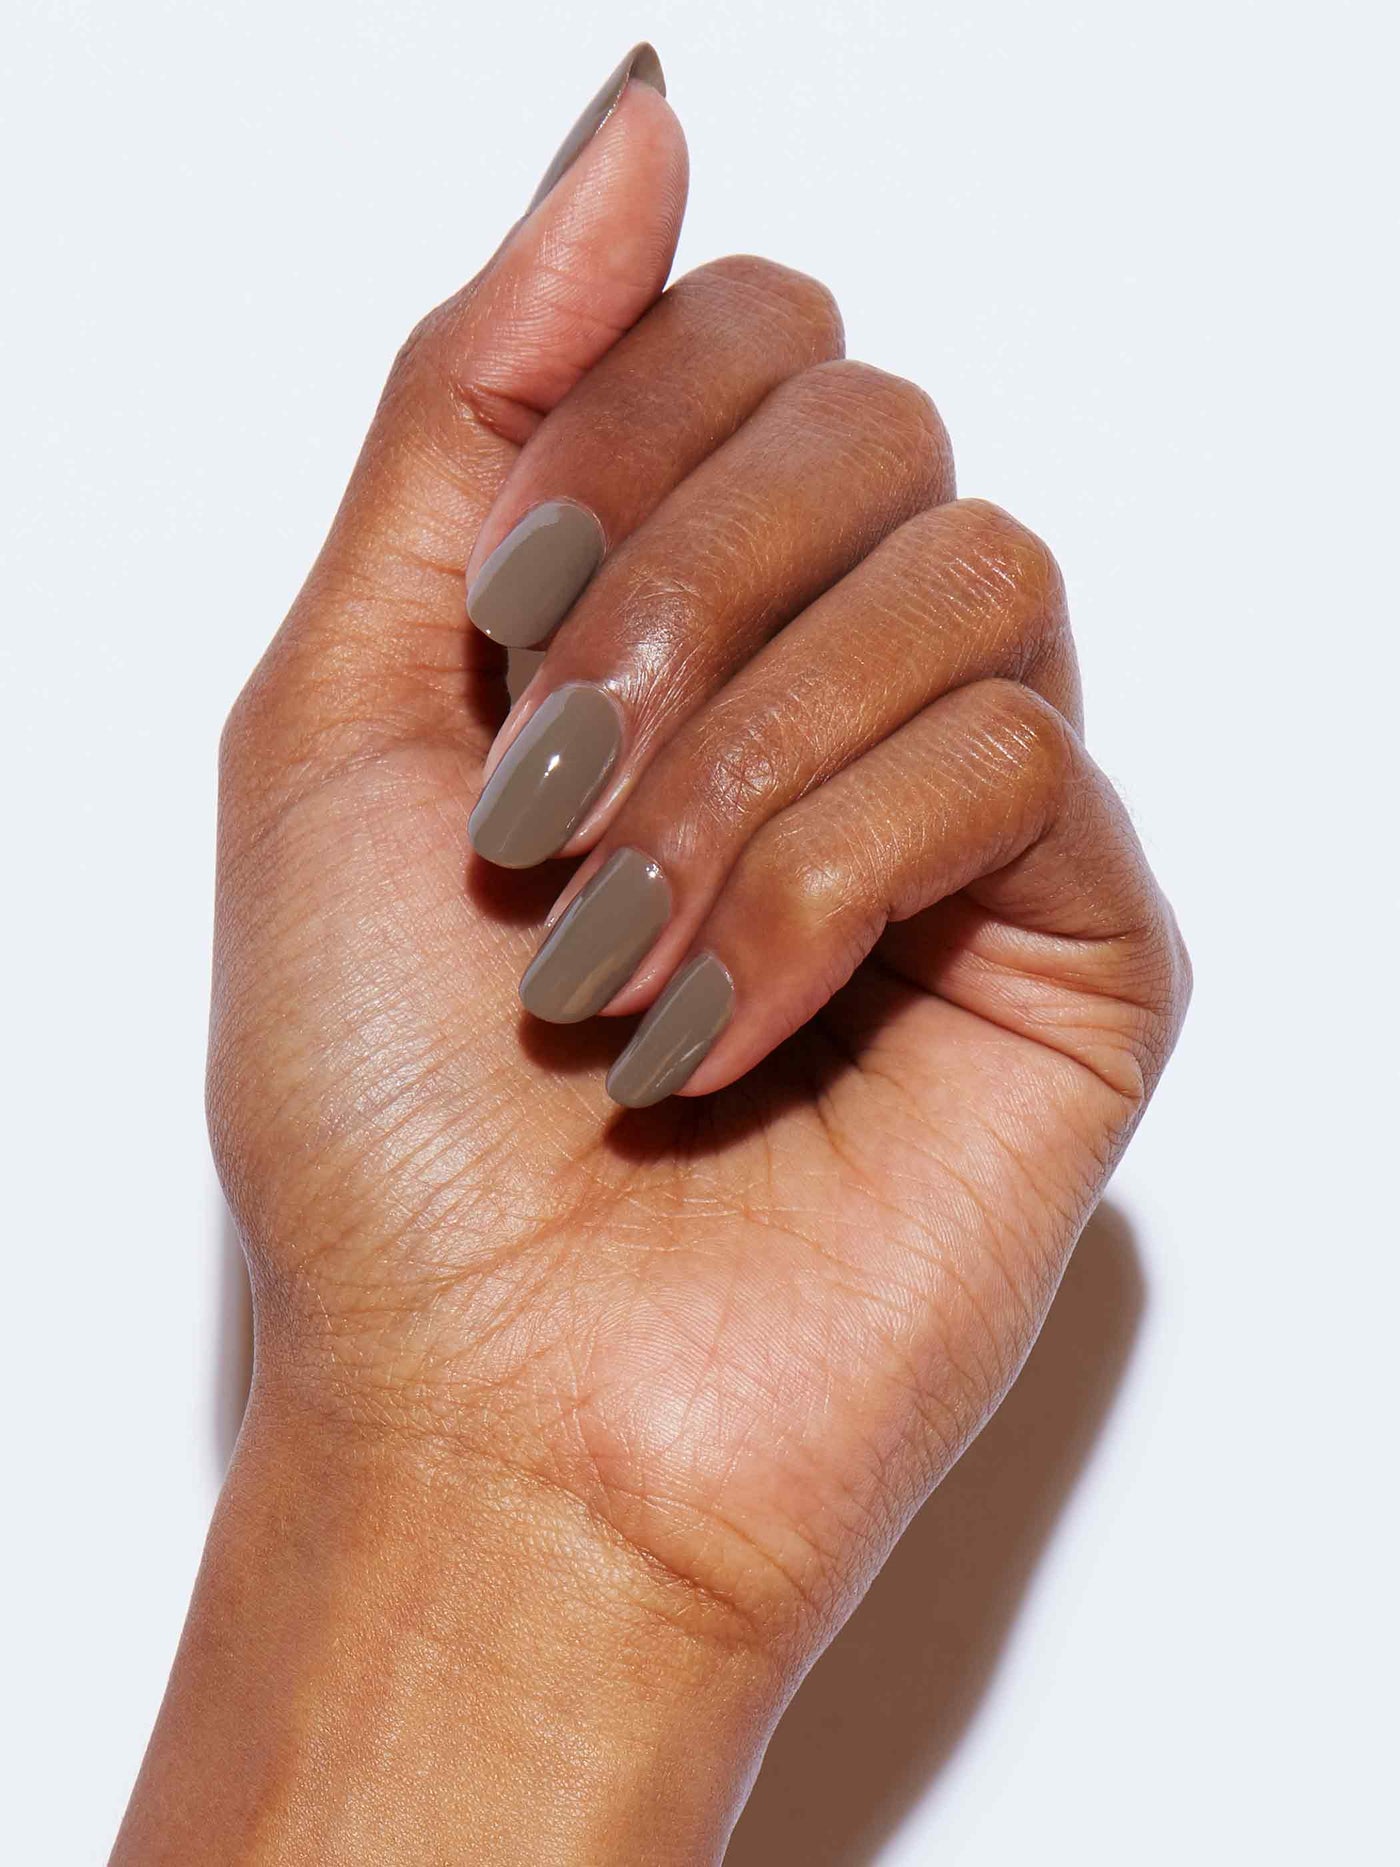 Olive green with taupe undertones, Full coverage, Rich